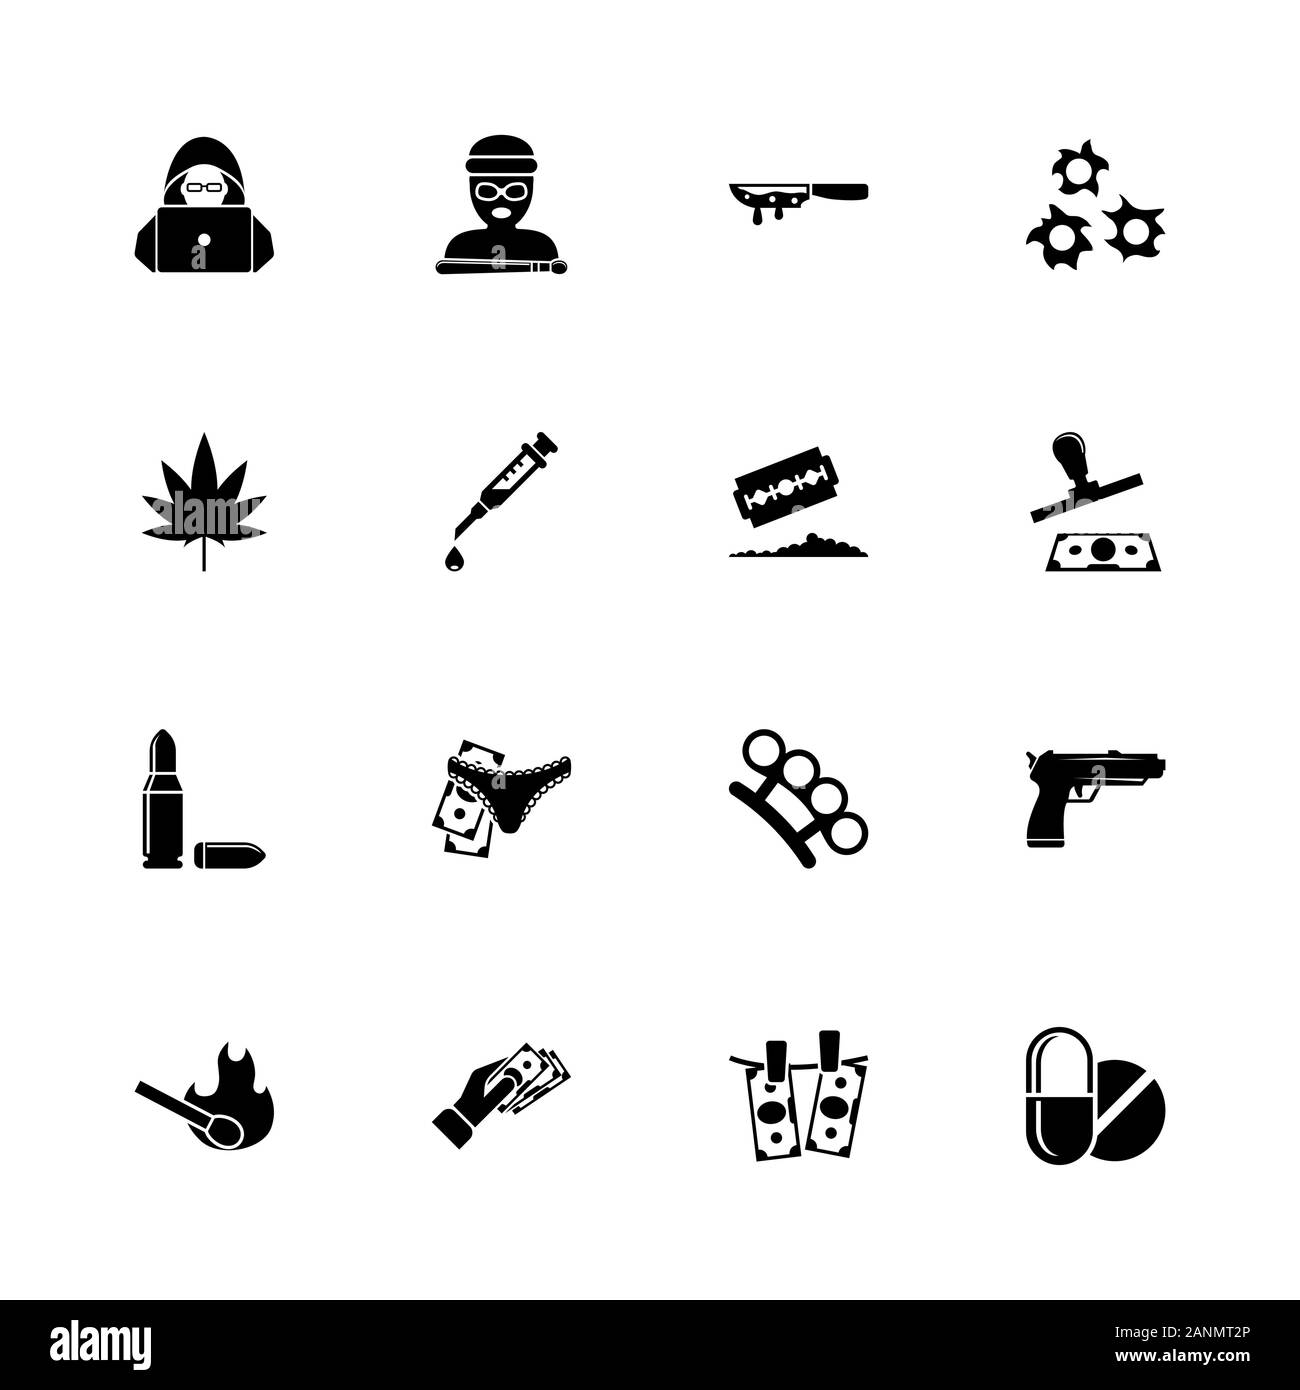 Crime icons - Expand to any size - Change to any colour. Flat Vector Icons - Black Illustration on White Background. Stock Vector